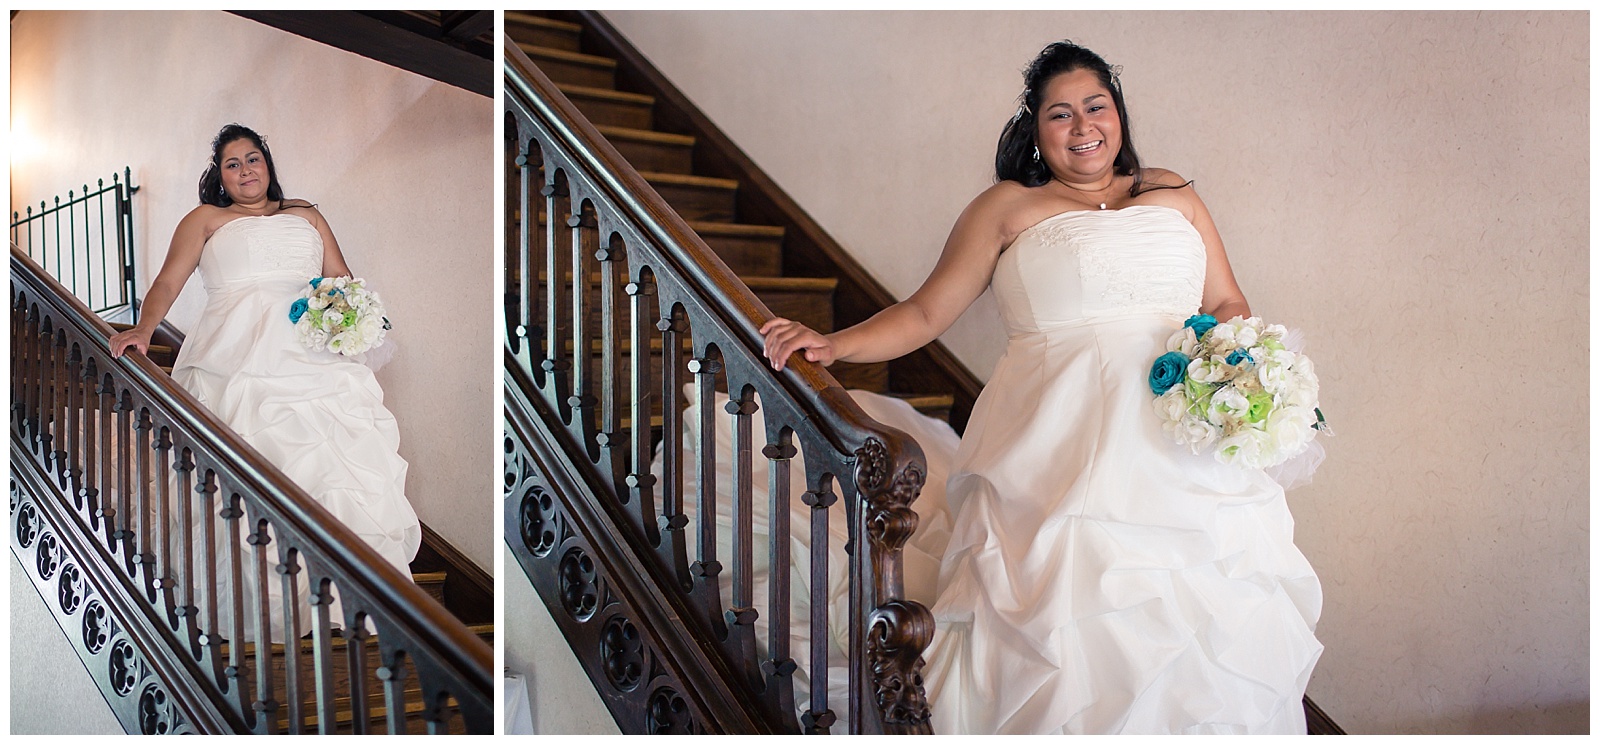 Wedding photography at Simpson House in Kansas City.